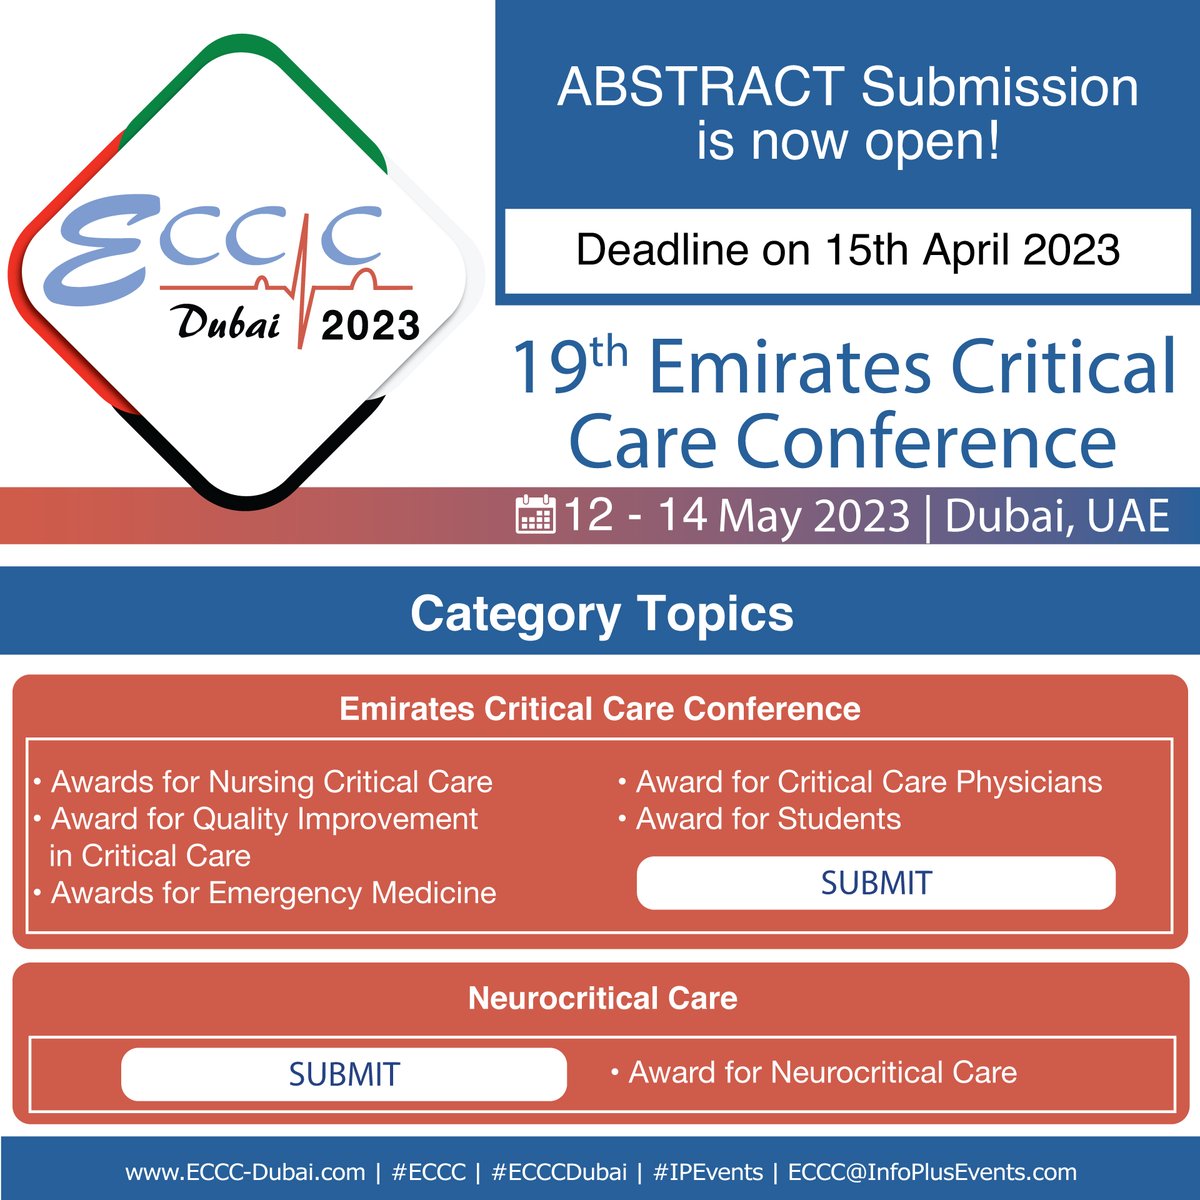 ABSTRACT SUBMISSION is now open for ECCC 2023!

Submit your cases @ bit.ly/ECCC23Abs

#CriticalCareConference #ECCC2023 #IPEvents #ICU #EmergencyMedicine #CriticalCarePhysicians #CriticalCareNursing